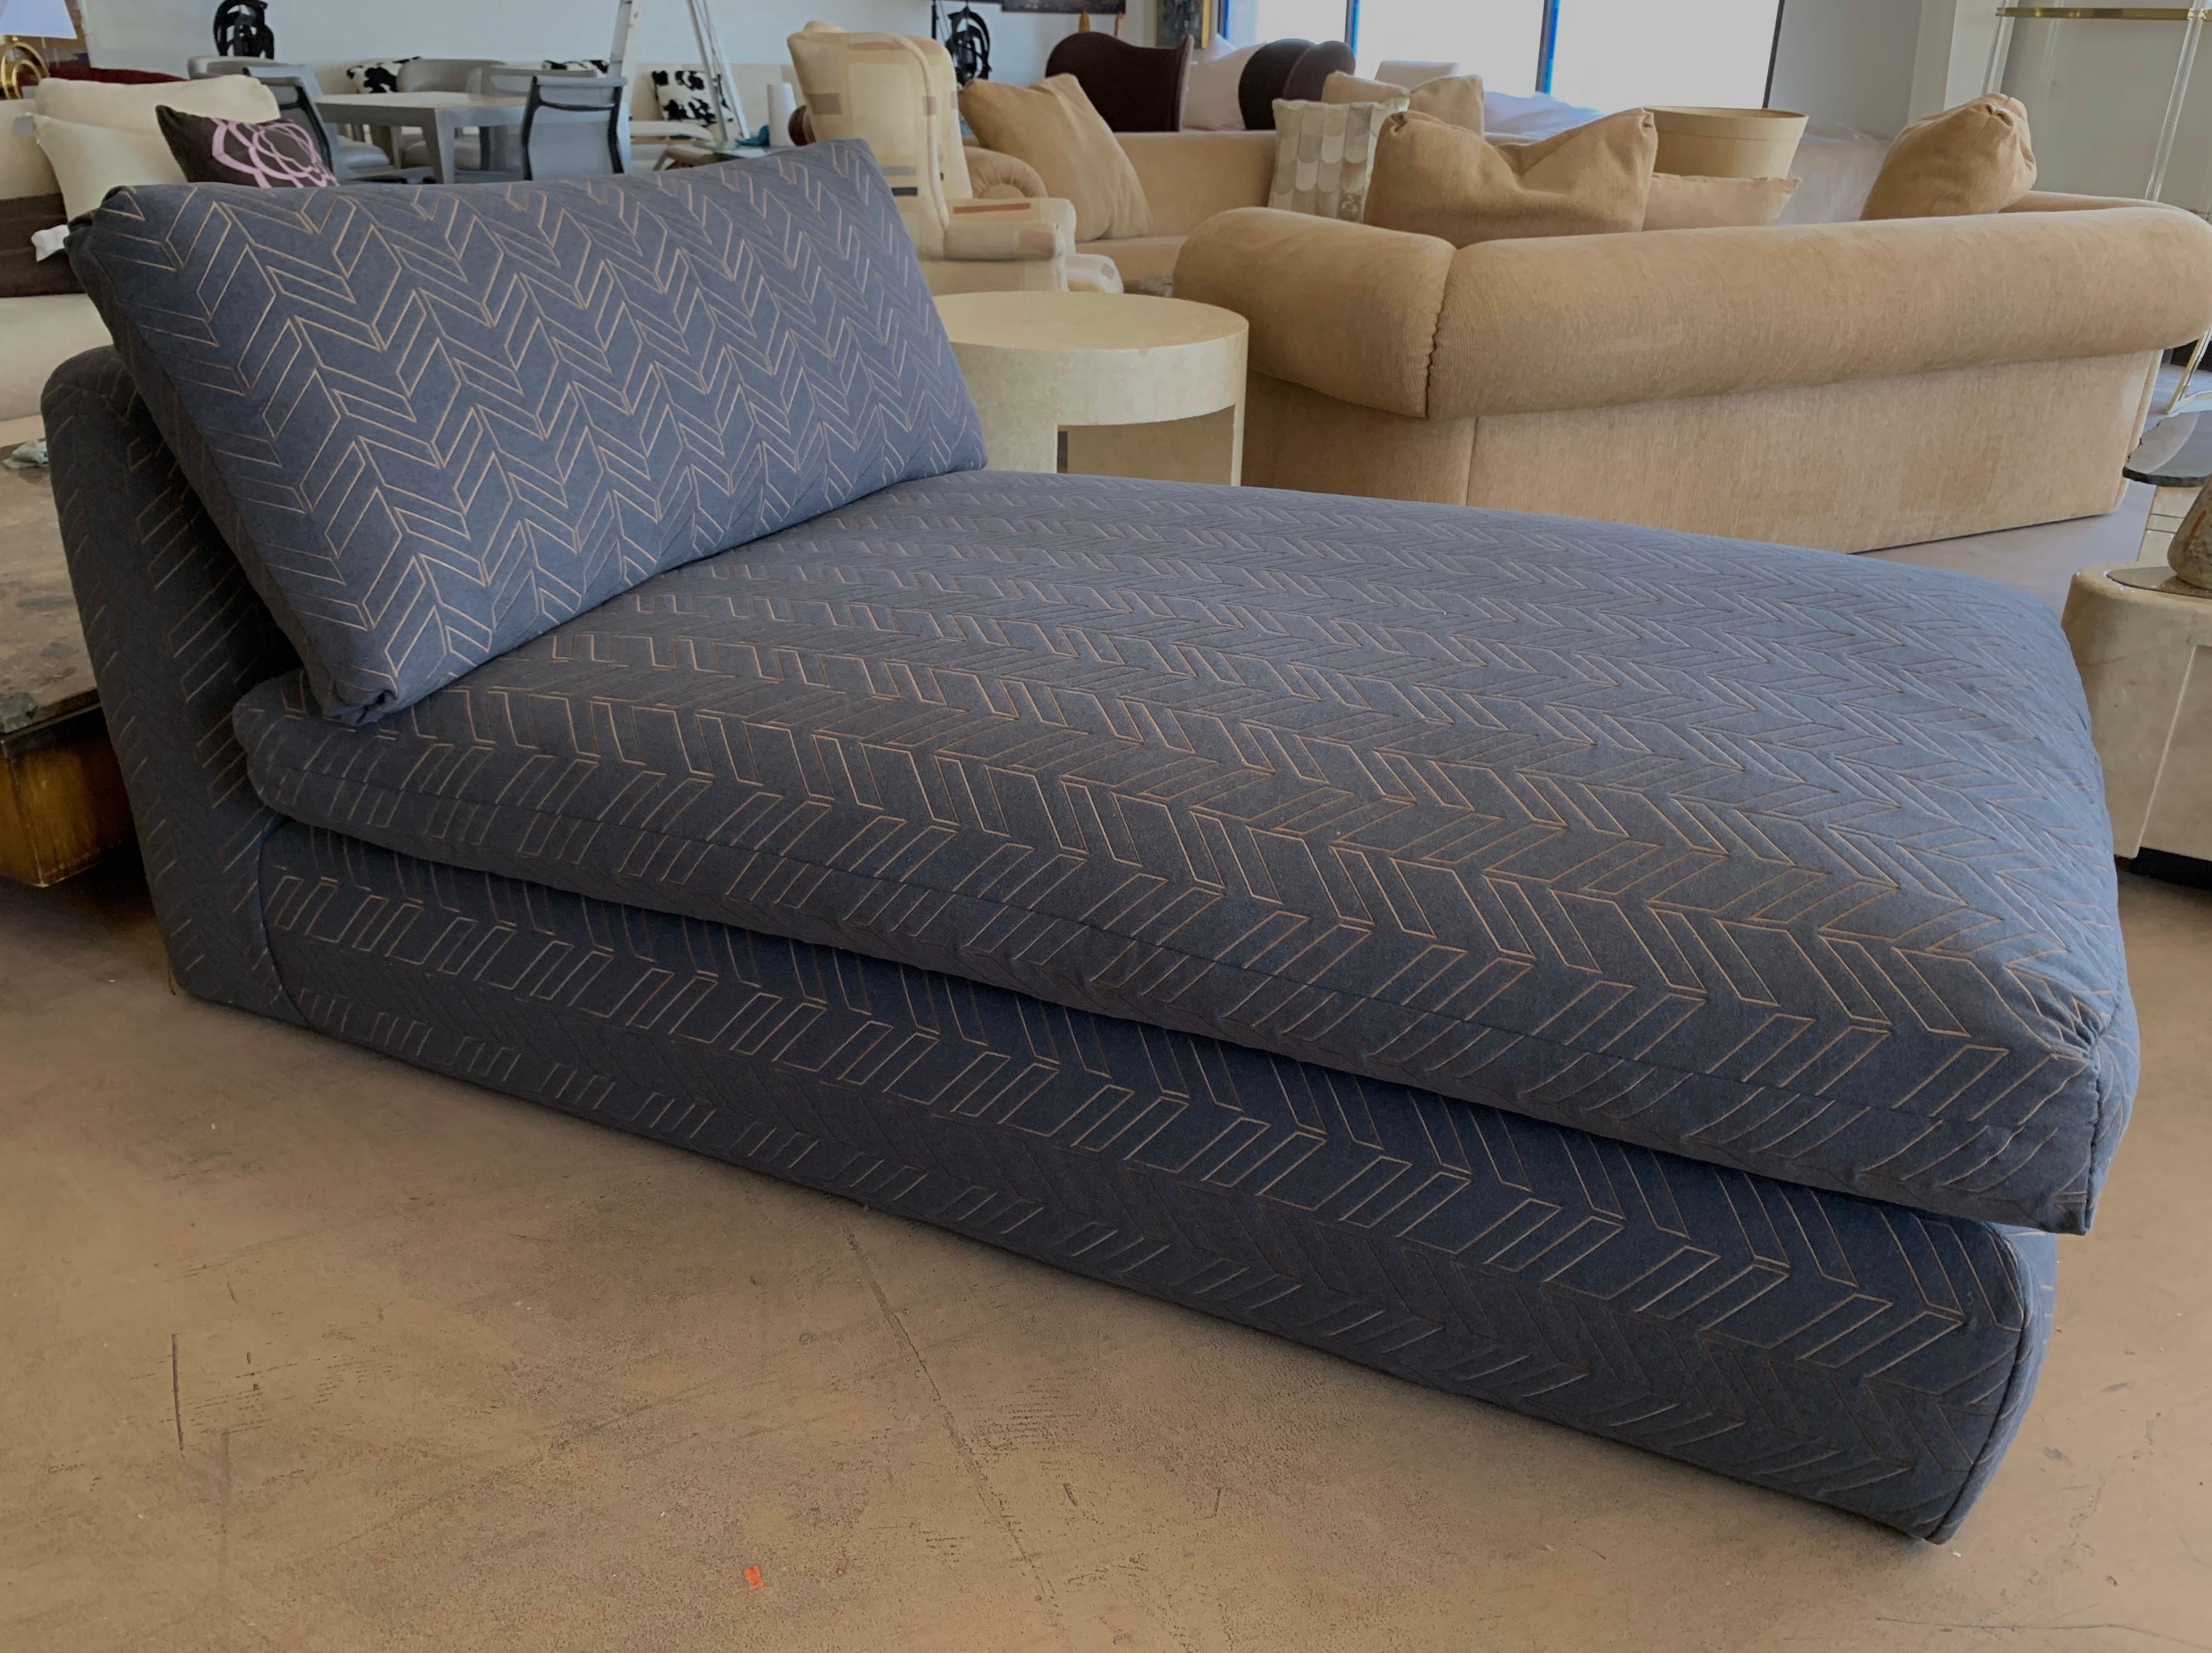 Fabric Steve Chase Grey & Bronze Modern Chaise Lounge from the Palm Springs Kroc Estate